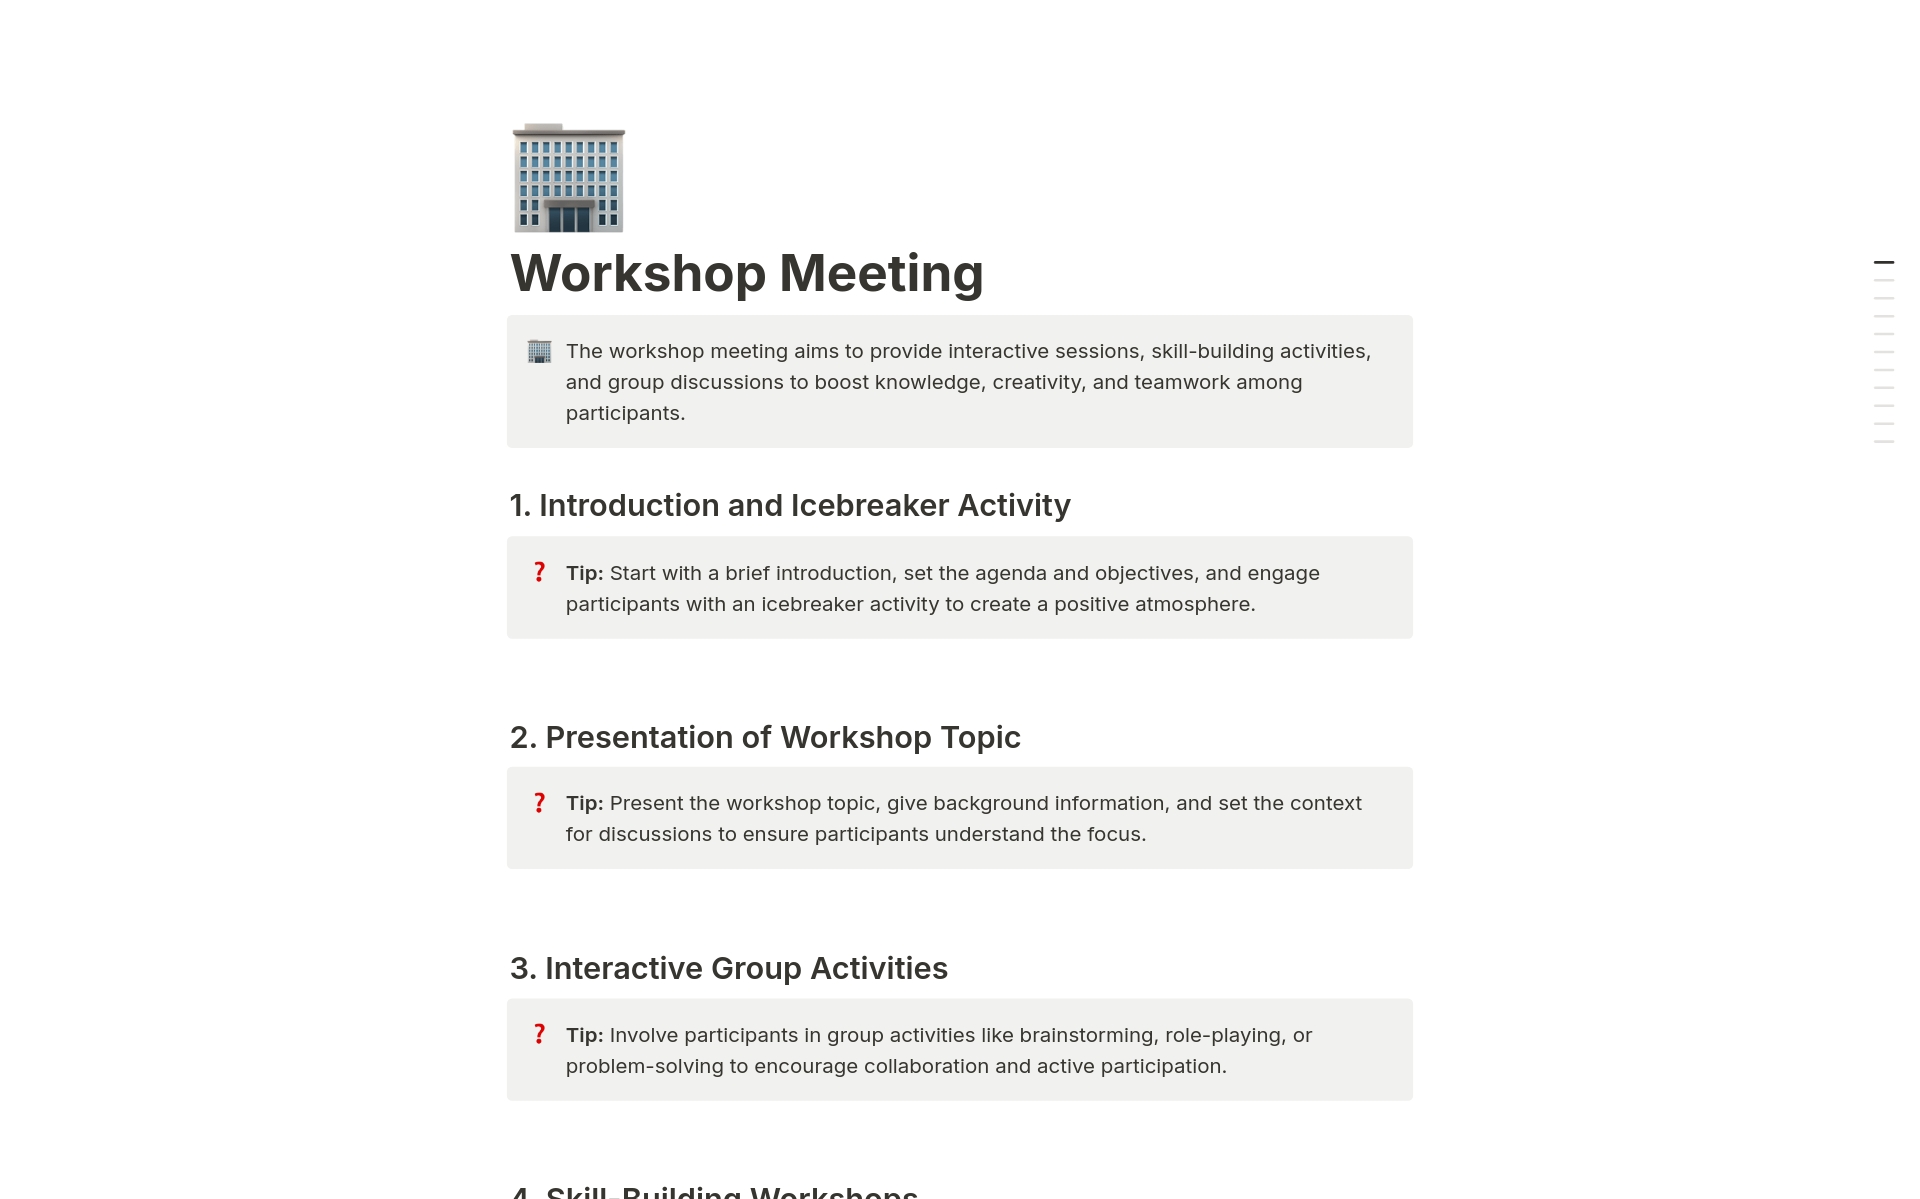 The workshop meeting aims to provide interactive sessions, skill-building activities, and group discussions to boost knowledge, creativity, and teamwork among participants.